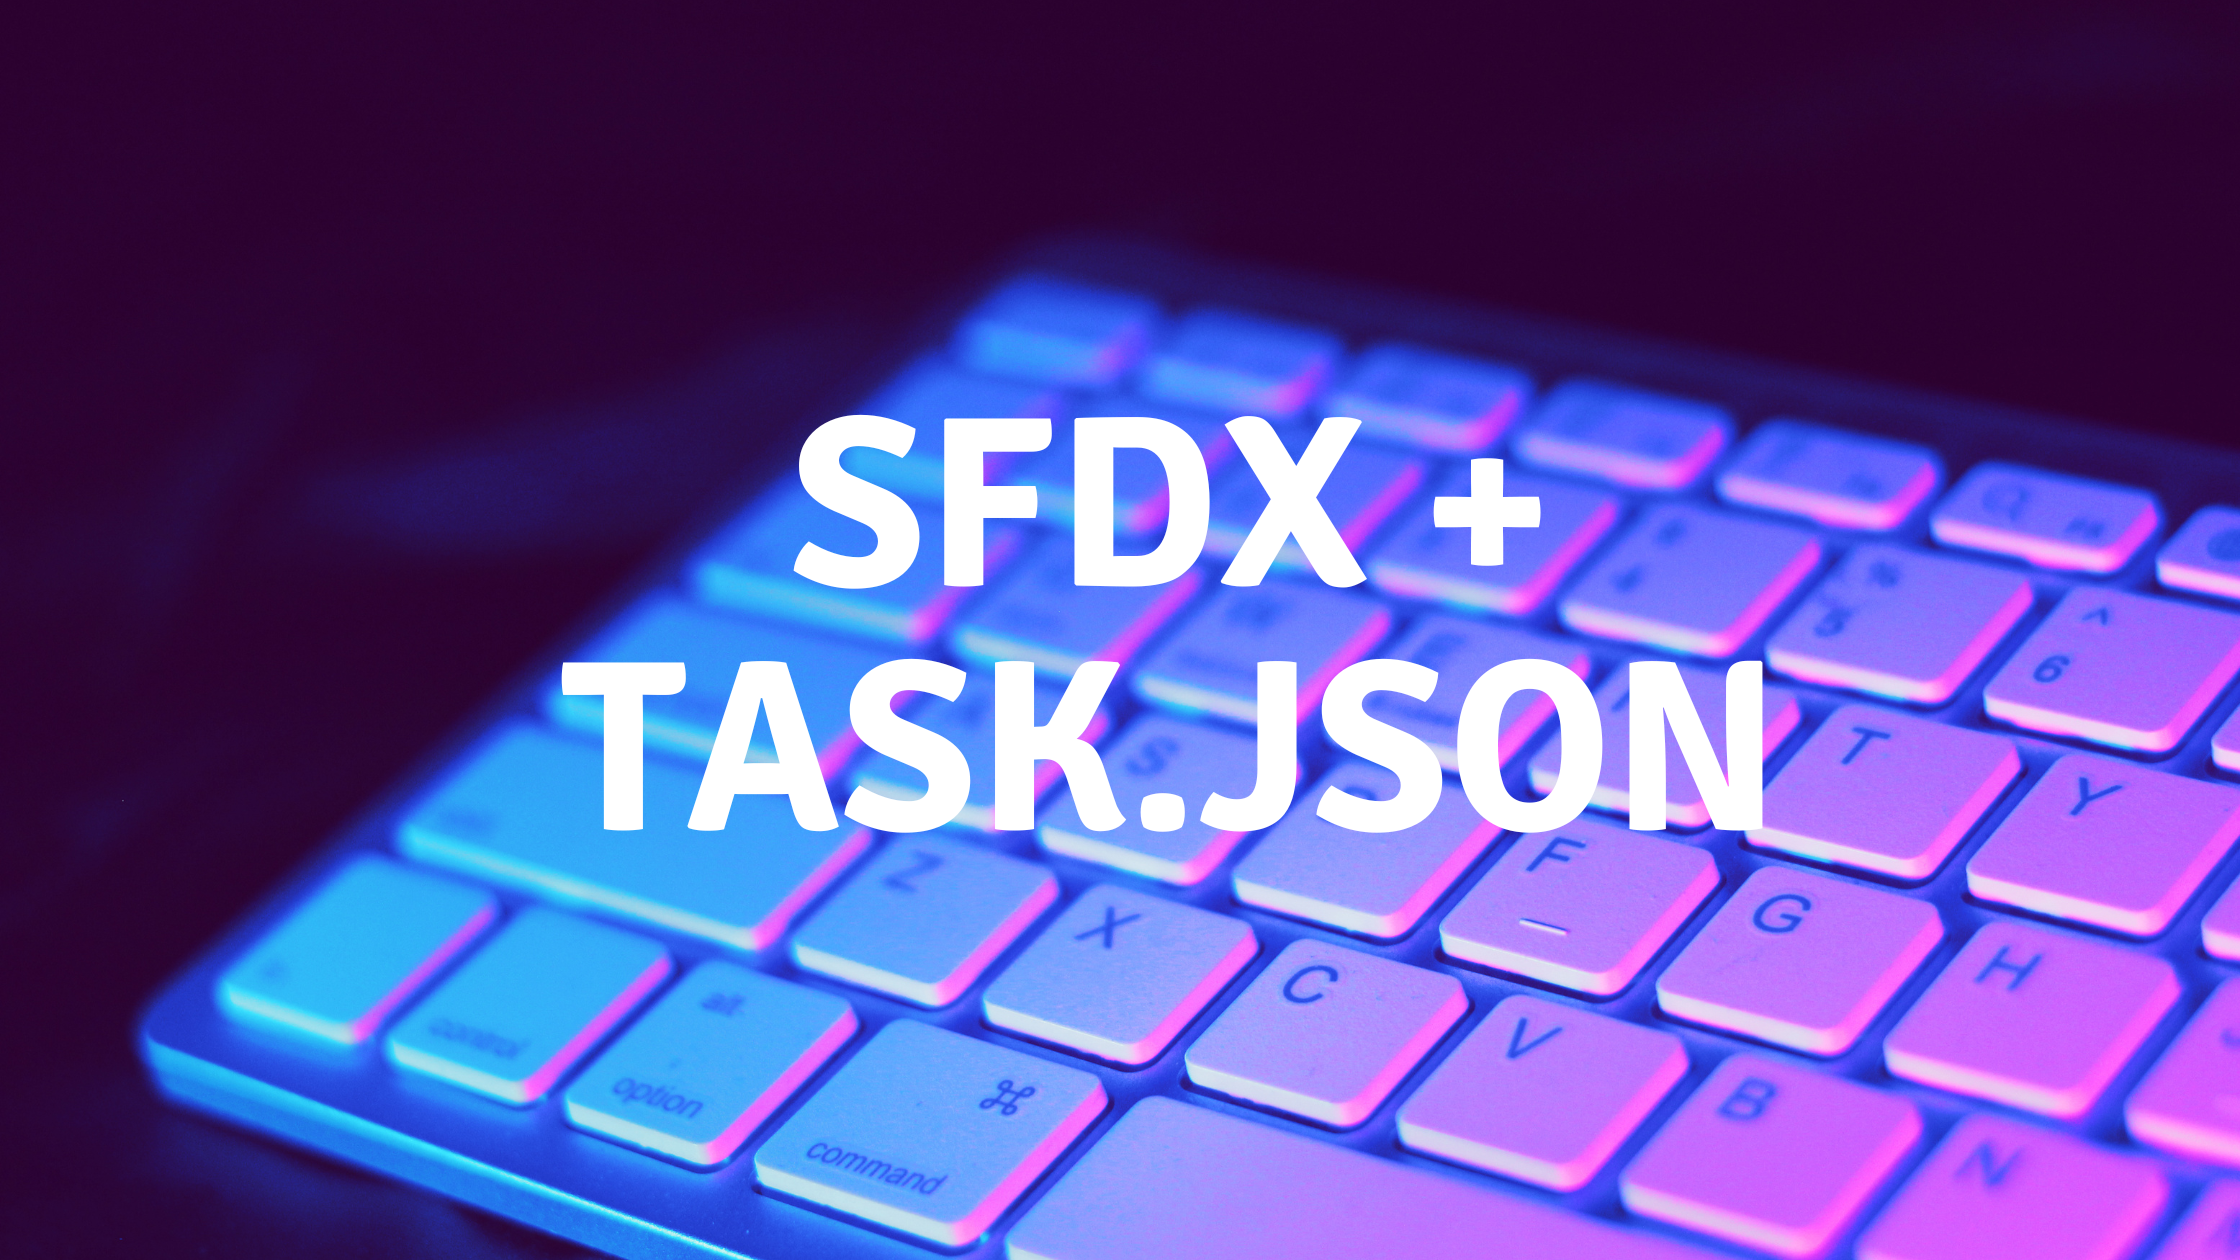 Automate and Conquer: How Task.json Can Supercharge Your Salesforce Development